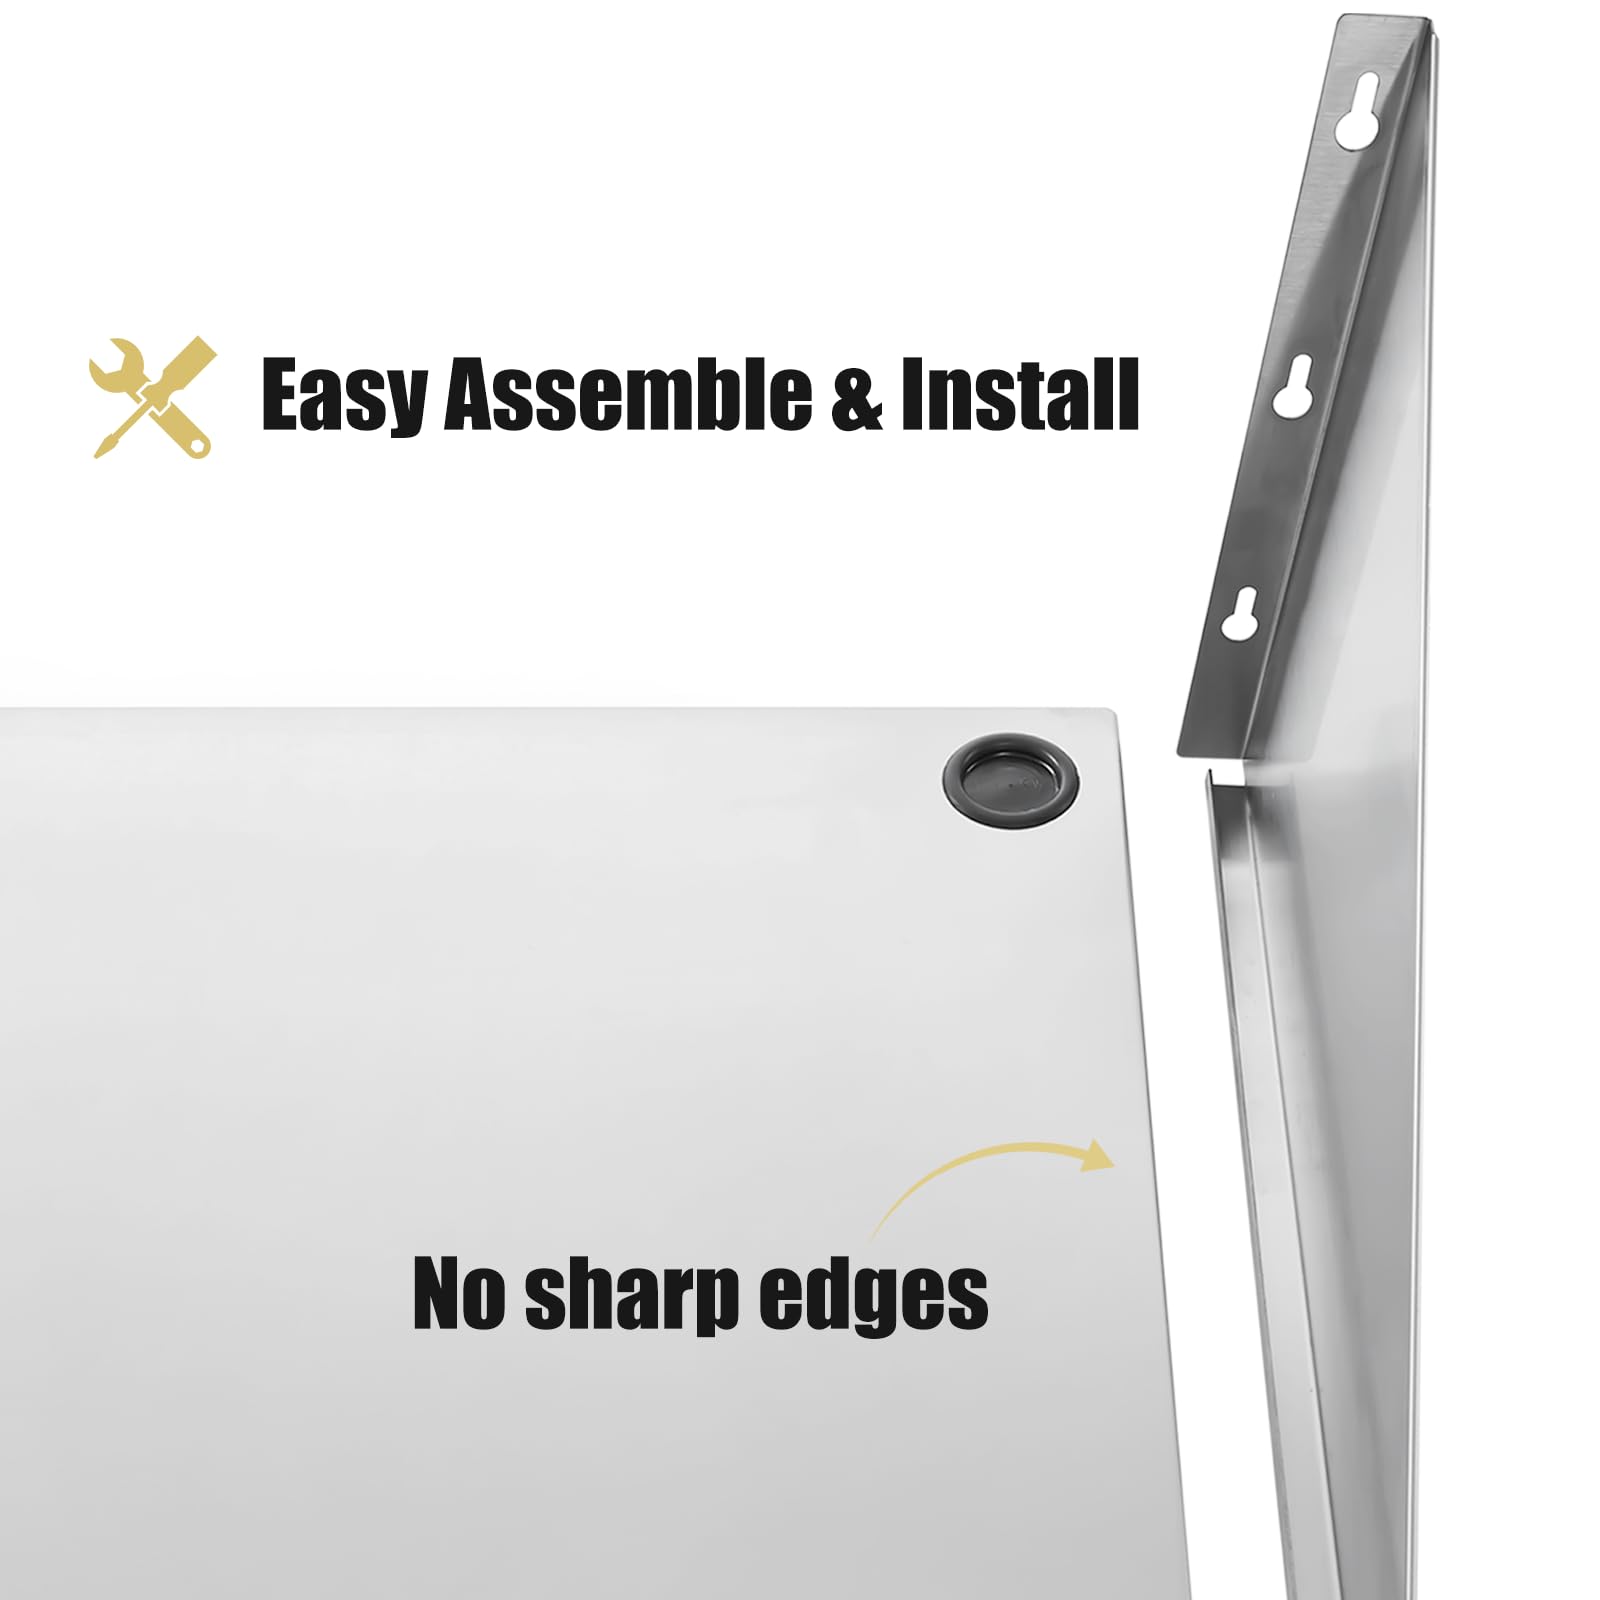 Hally Stainless Steel Microwave Shelf 24"x24" 200 lb, NSF Commercial Heavy Duty Metal Appliance Wall Mount Floating Shelving for Restaurant, Kitchen, Bar, Home and Hotel